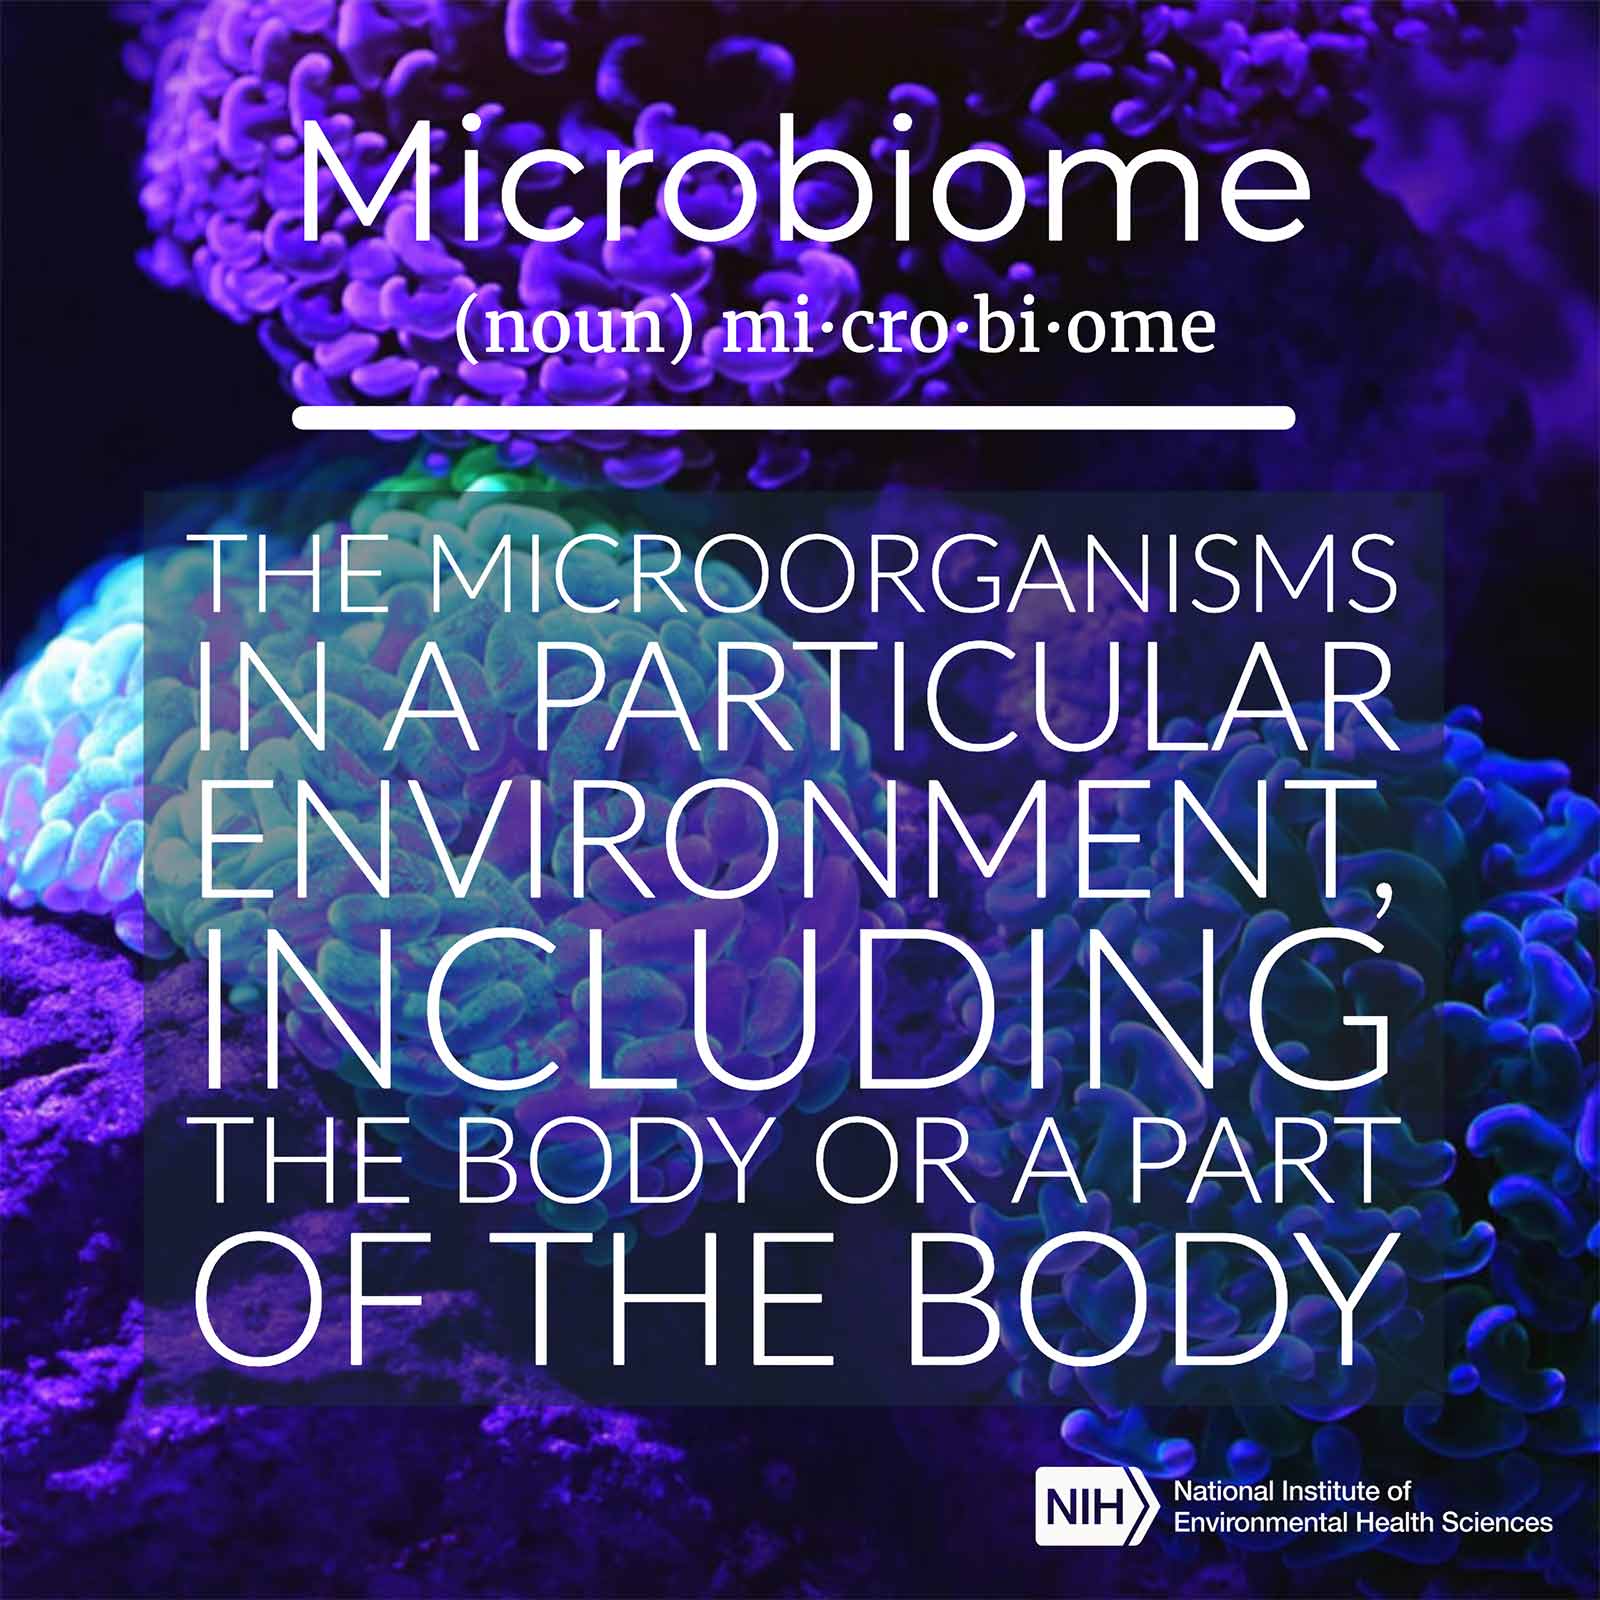 Microbiome (noun) defined as &#39;the microorganisms in a particular environment, including the body or a part of the body&#39;